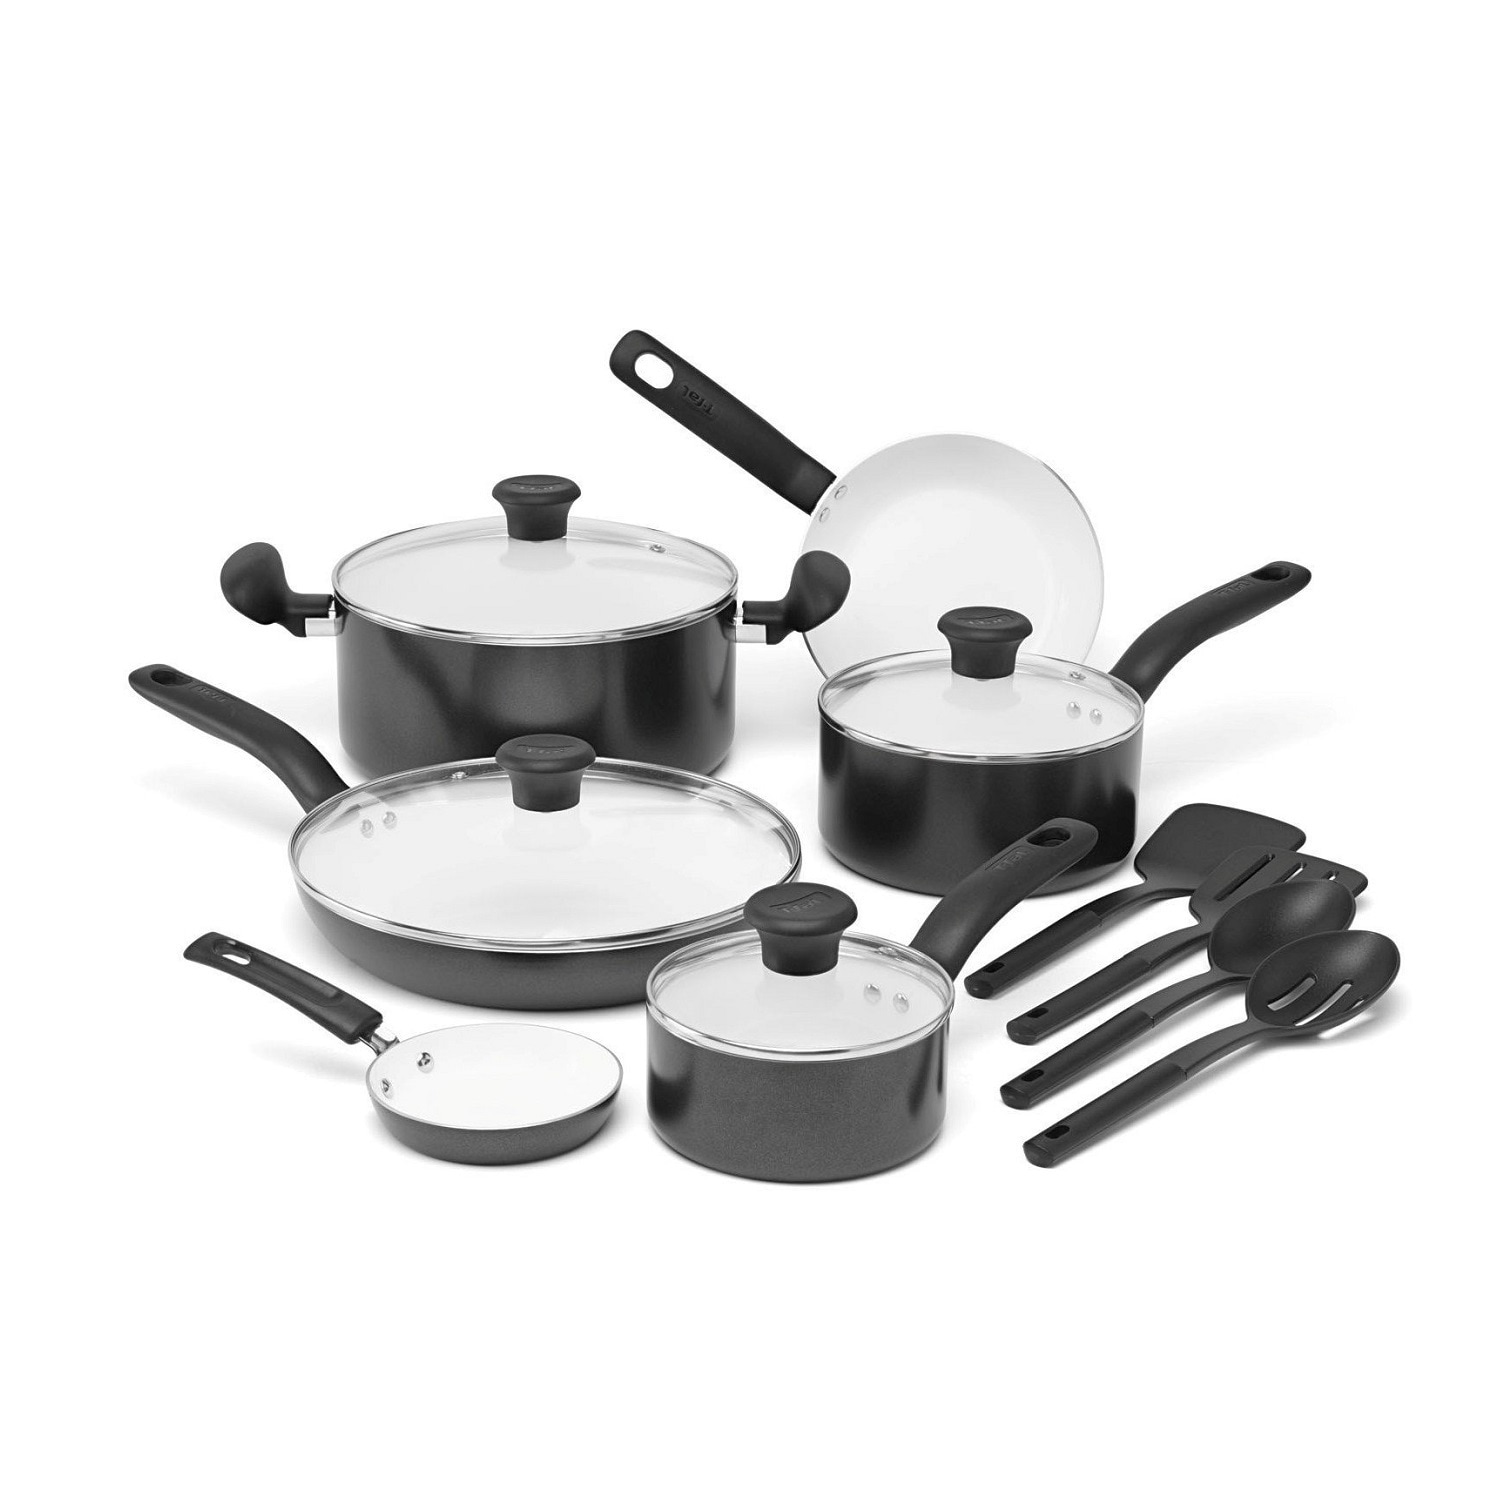 T-fal Performa Stainless Steel Cookware Set - Silver, 12 pc - Foods Co.